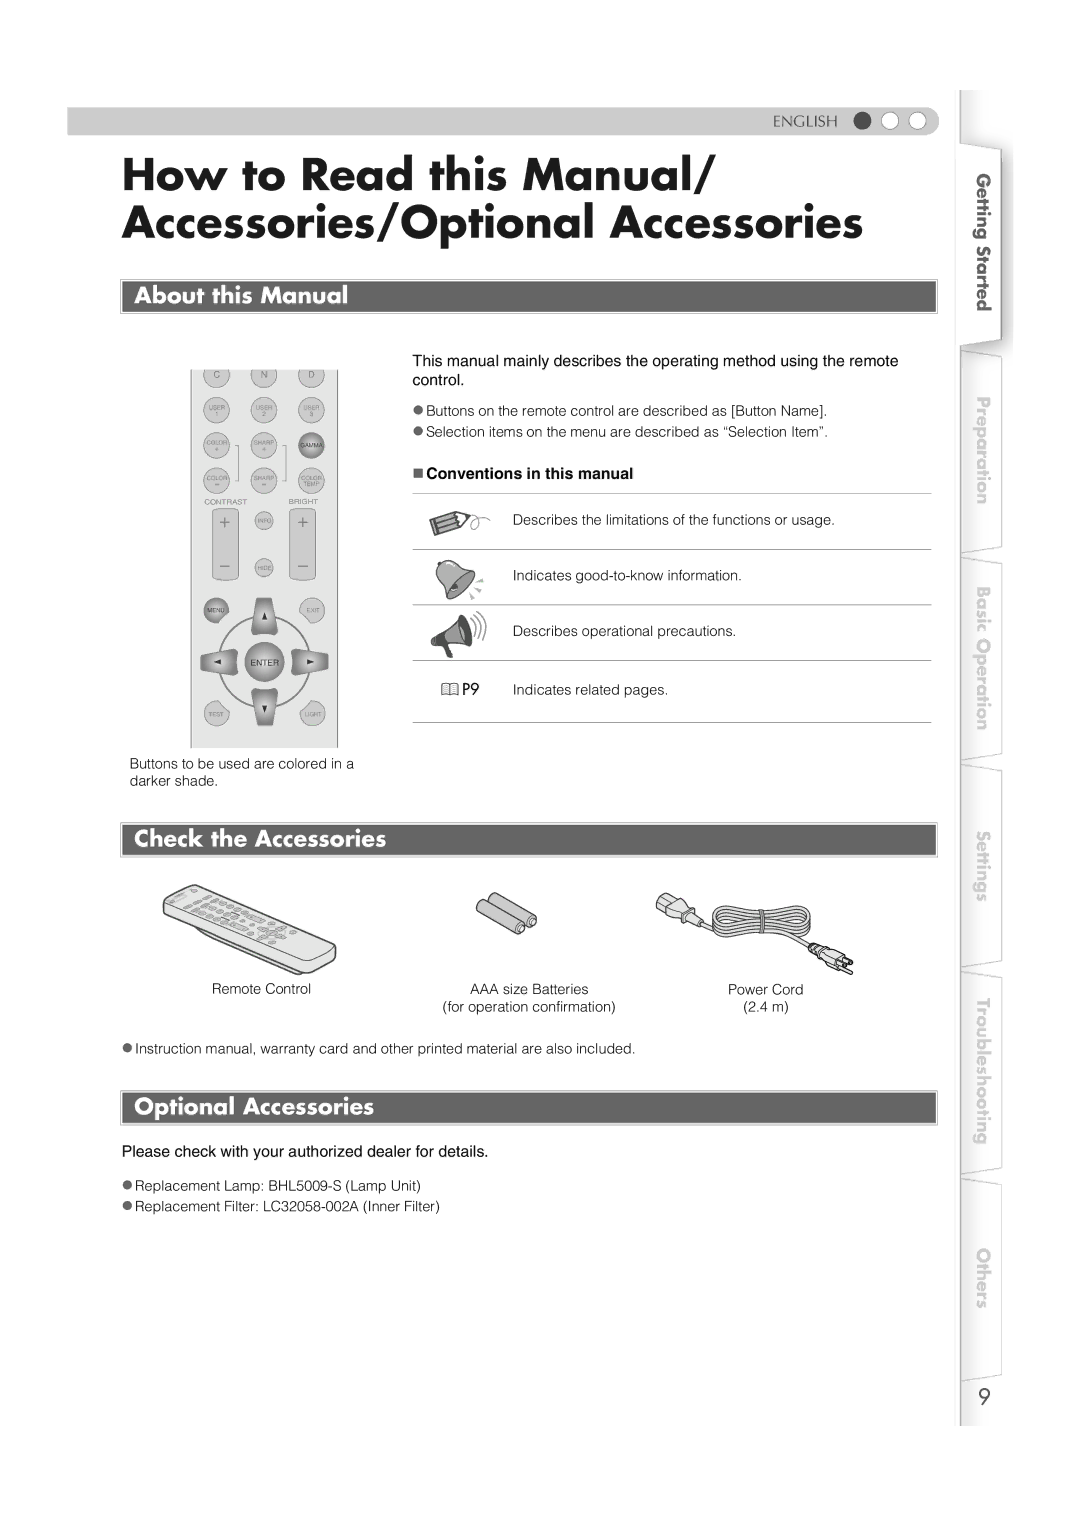 JVC DLA-RS1X manual How to Read this Manual/ Accessories/Optional Accessories, About this Manual, Check the Accessories 